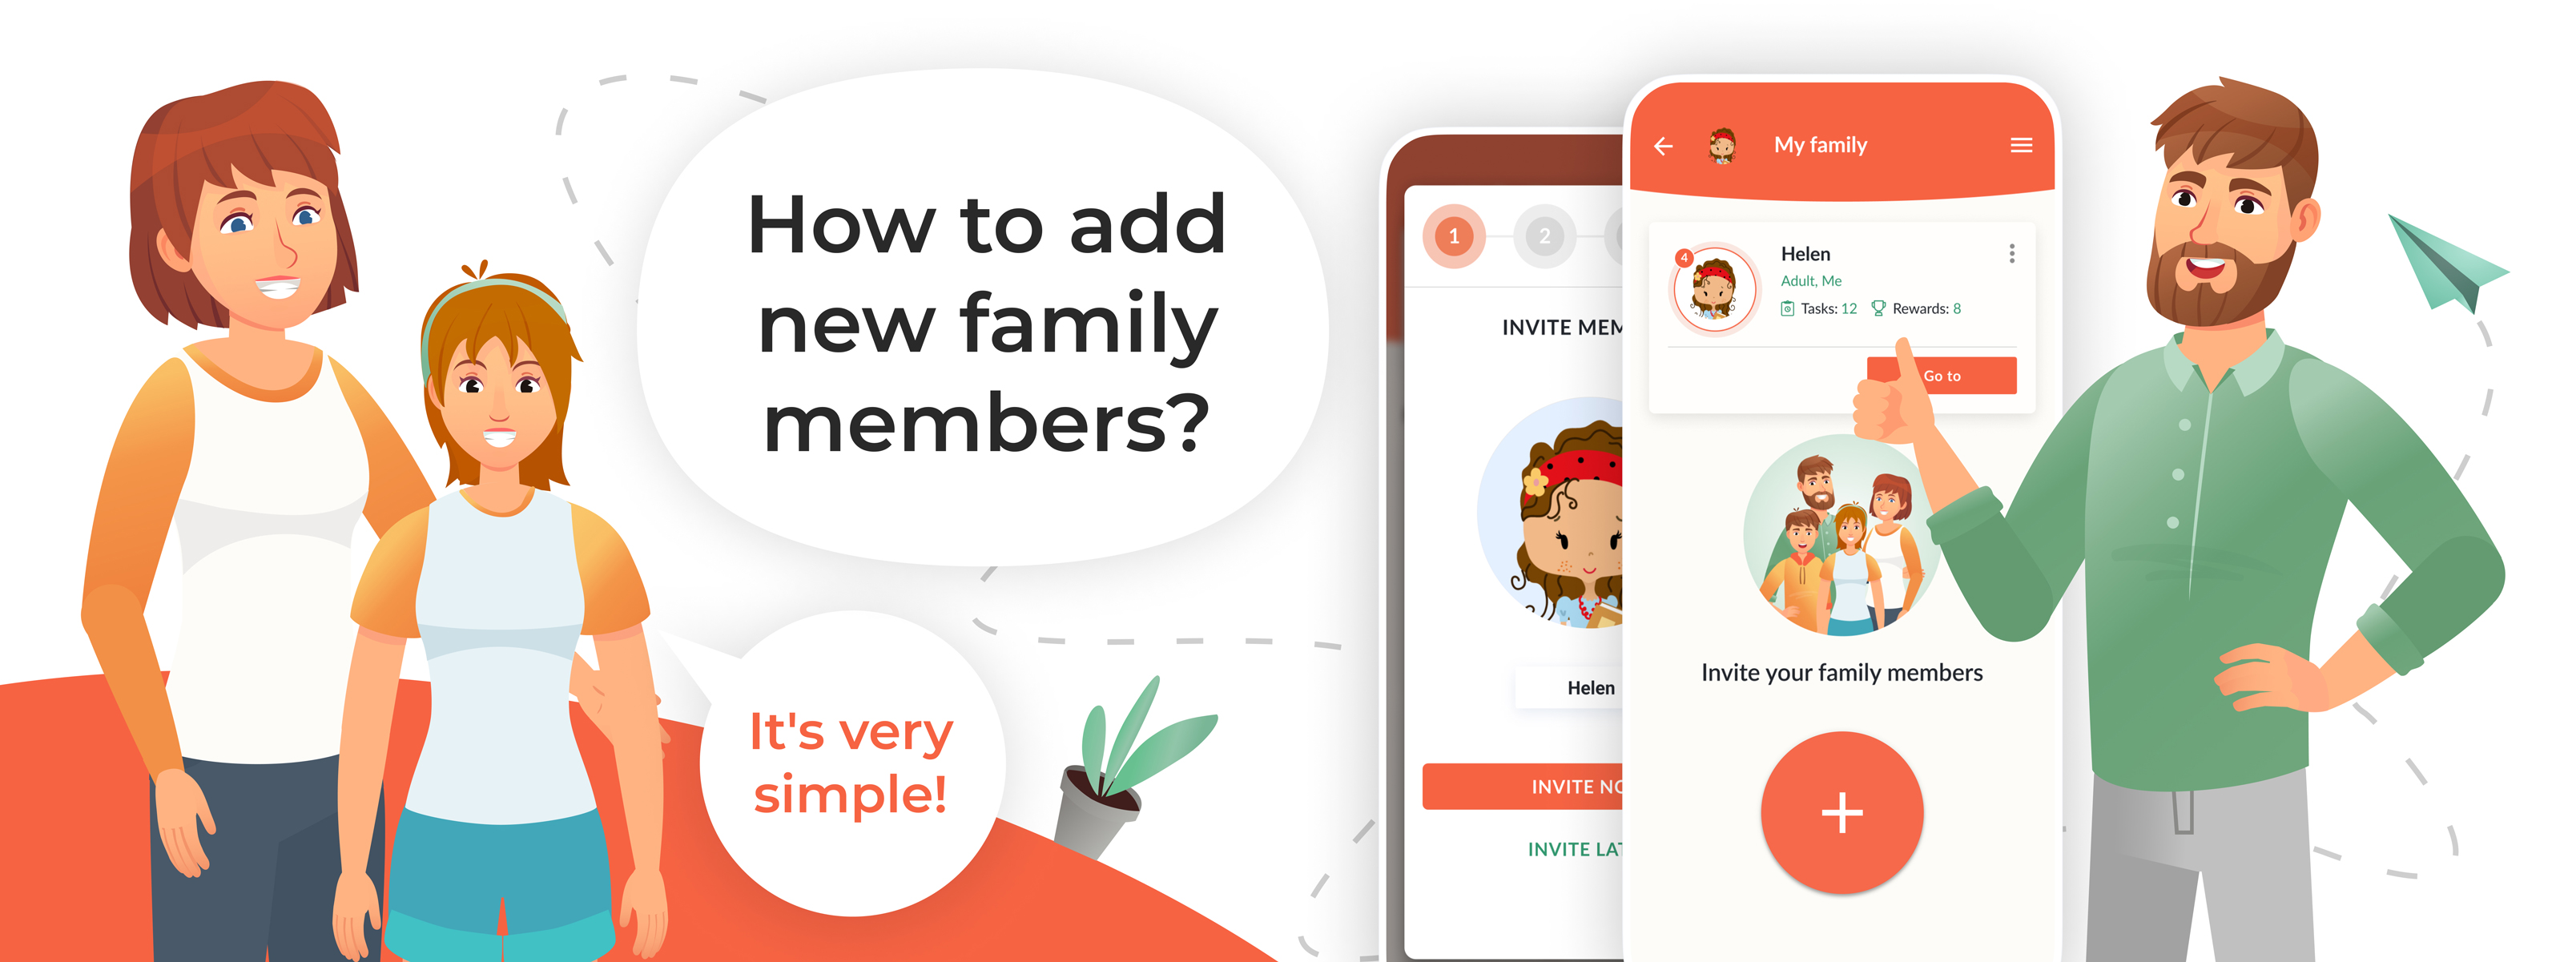 How to add a new family member to the app?